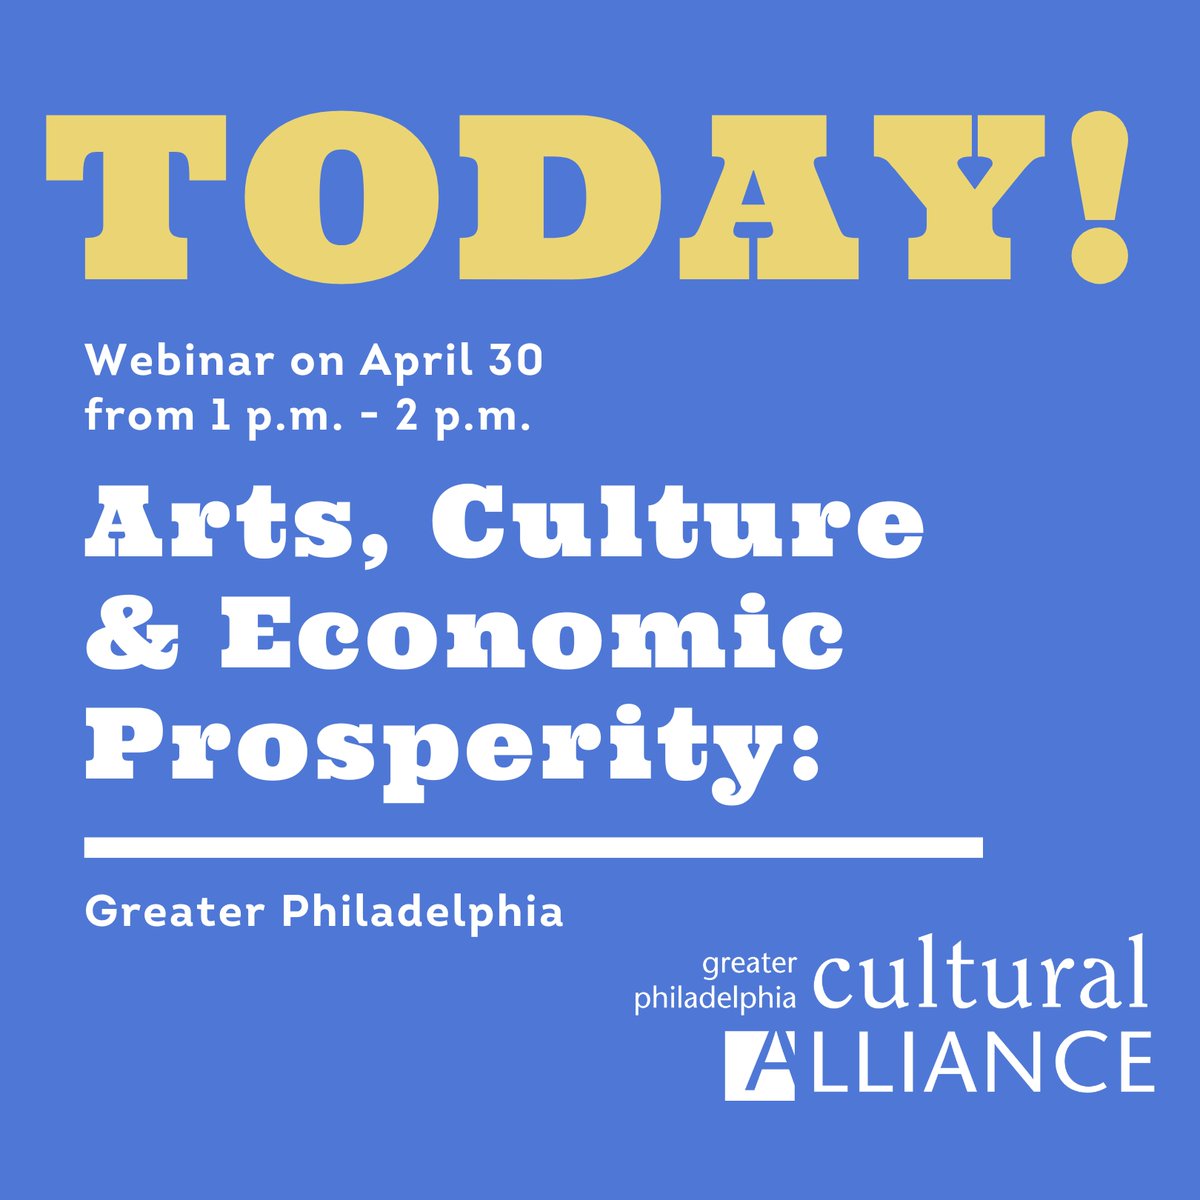 Last chance to register for today's webinar: 'Arts, Culture and Economic Prosperity: Greater Philadelphia'. Register at philaculture.org/prosperity